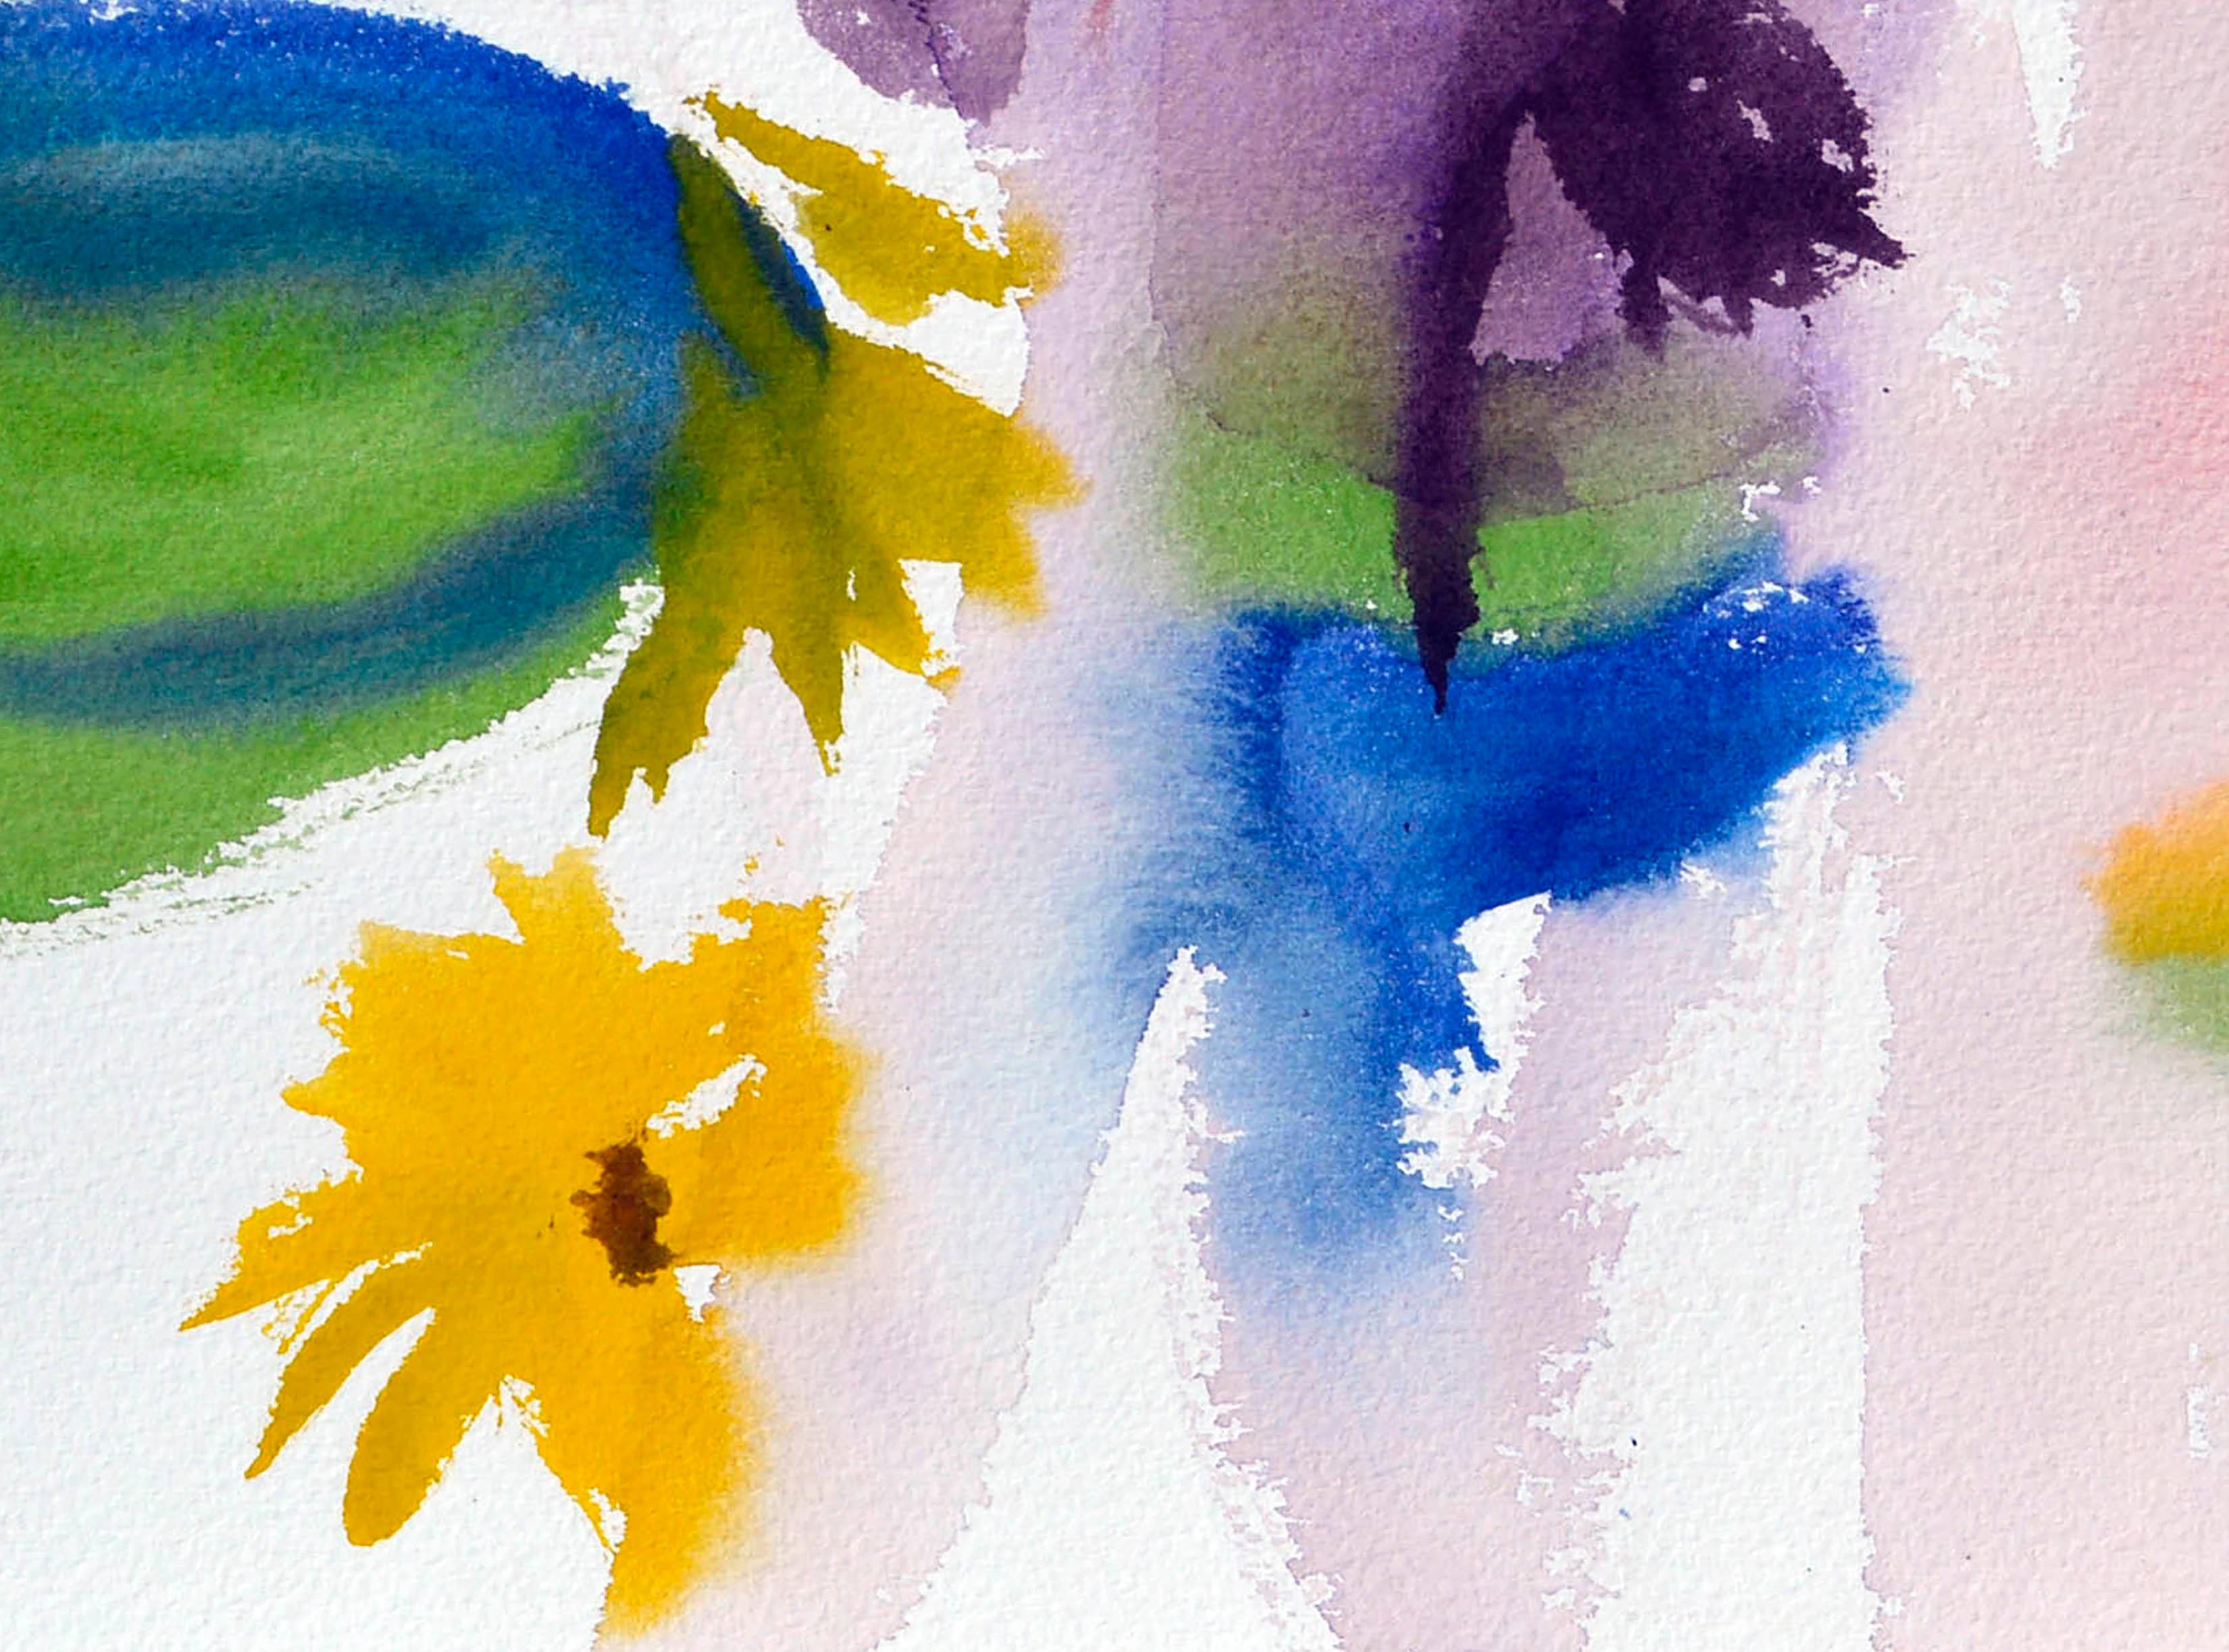 Abstract Flowers Watercolor - Abstract Expressionist Art by Les Anderson